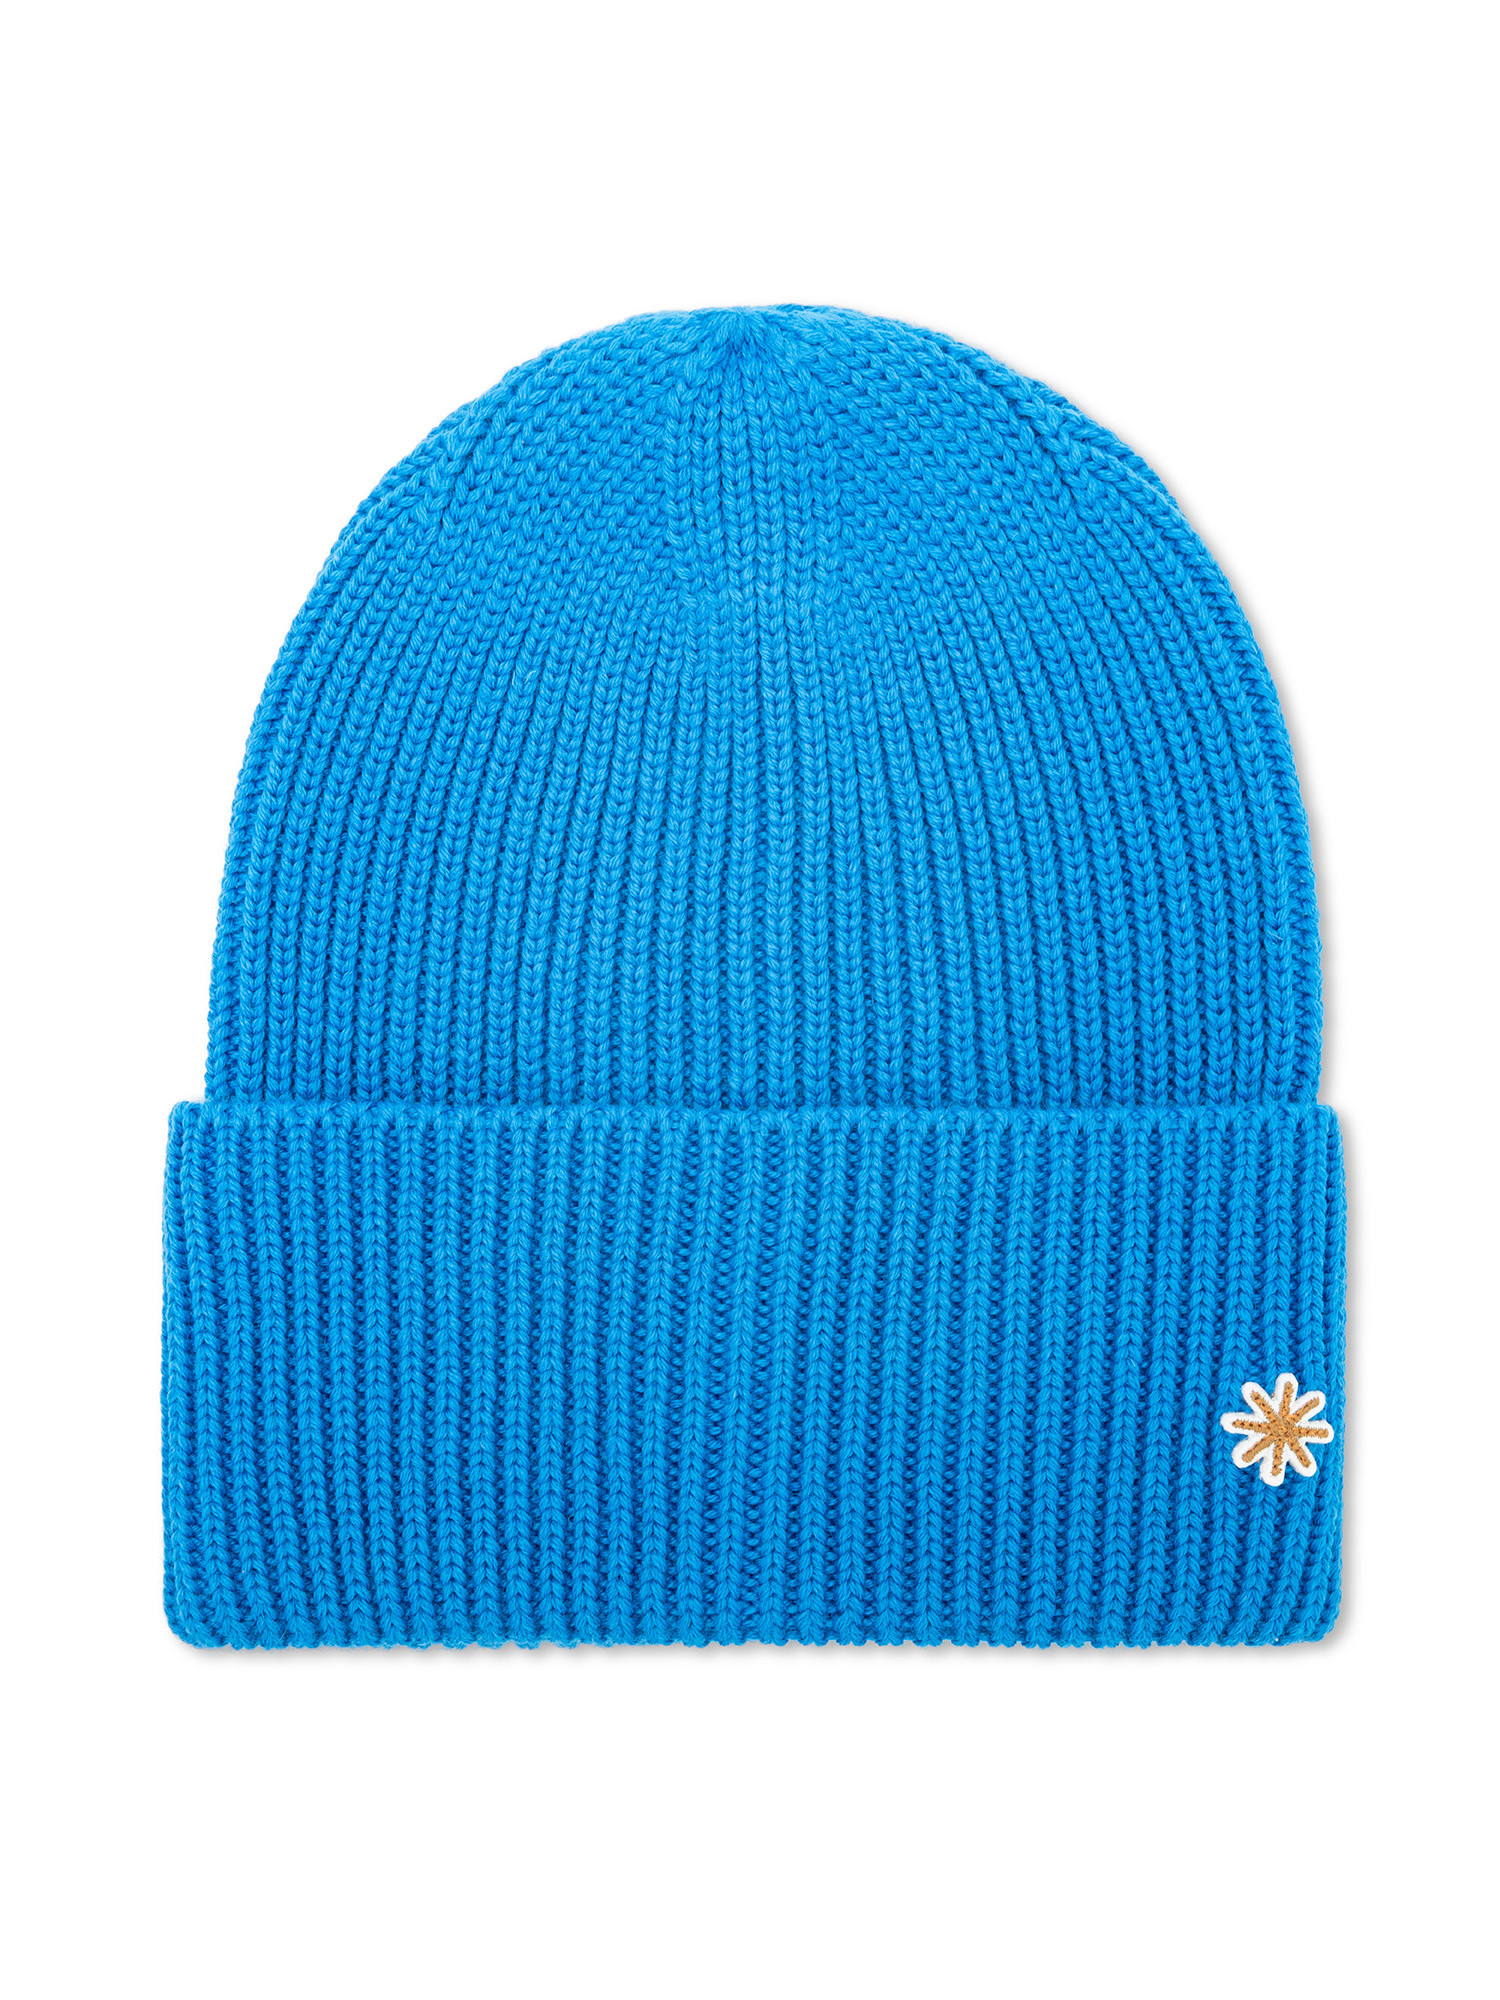 English purl Beanie, Blue, large image number 0